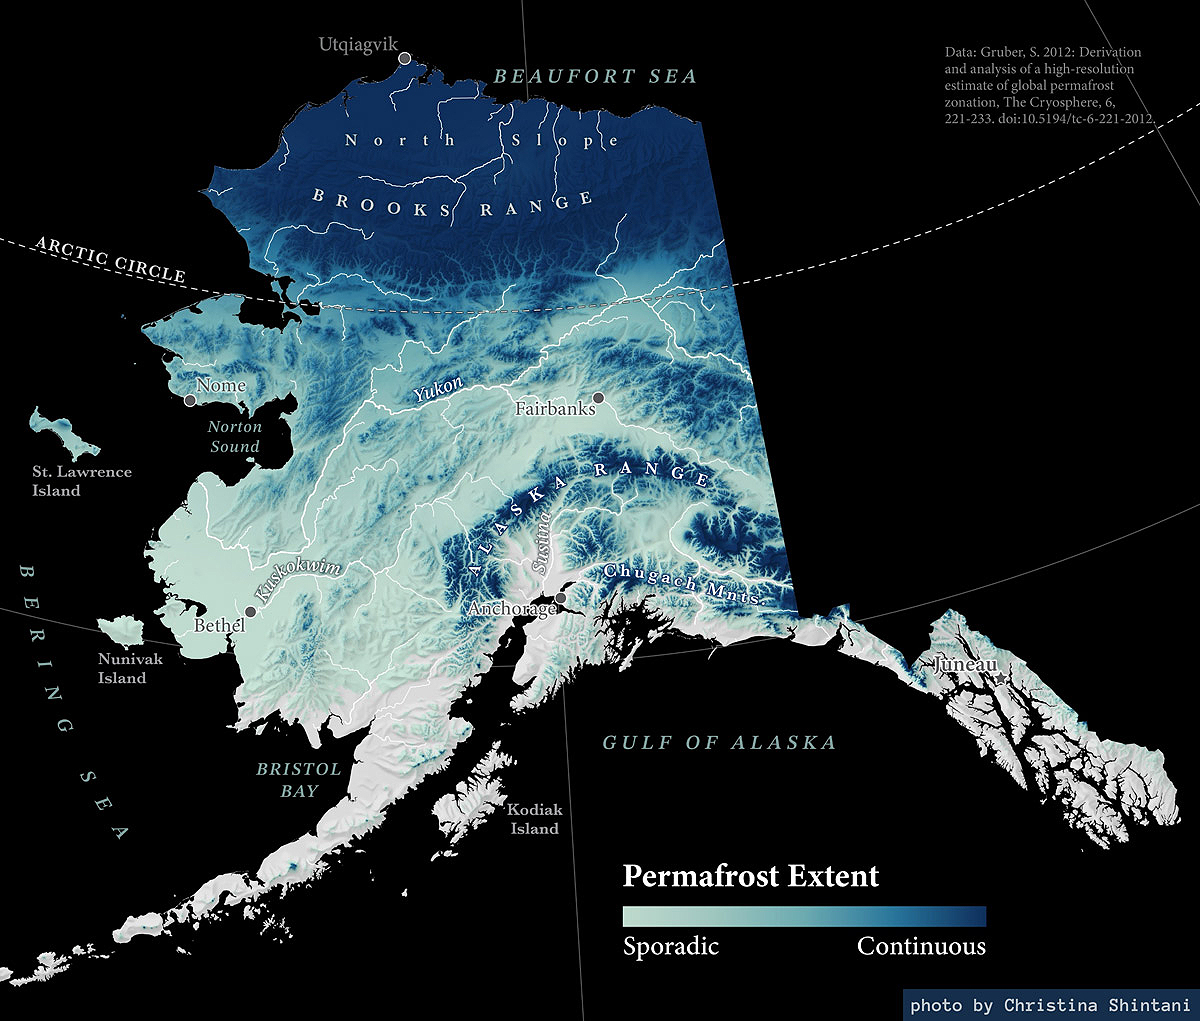 Image by Christina Shintani showing a map of permafrost extent in Alaska.